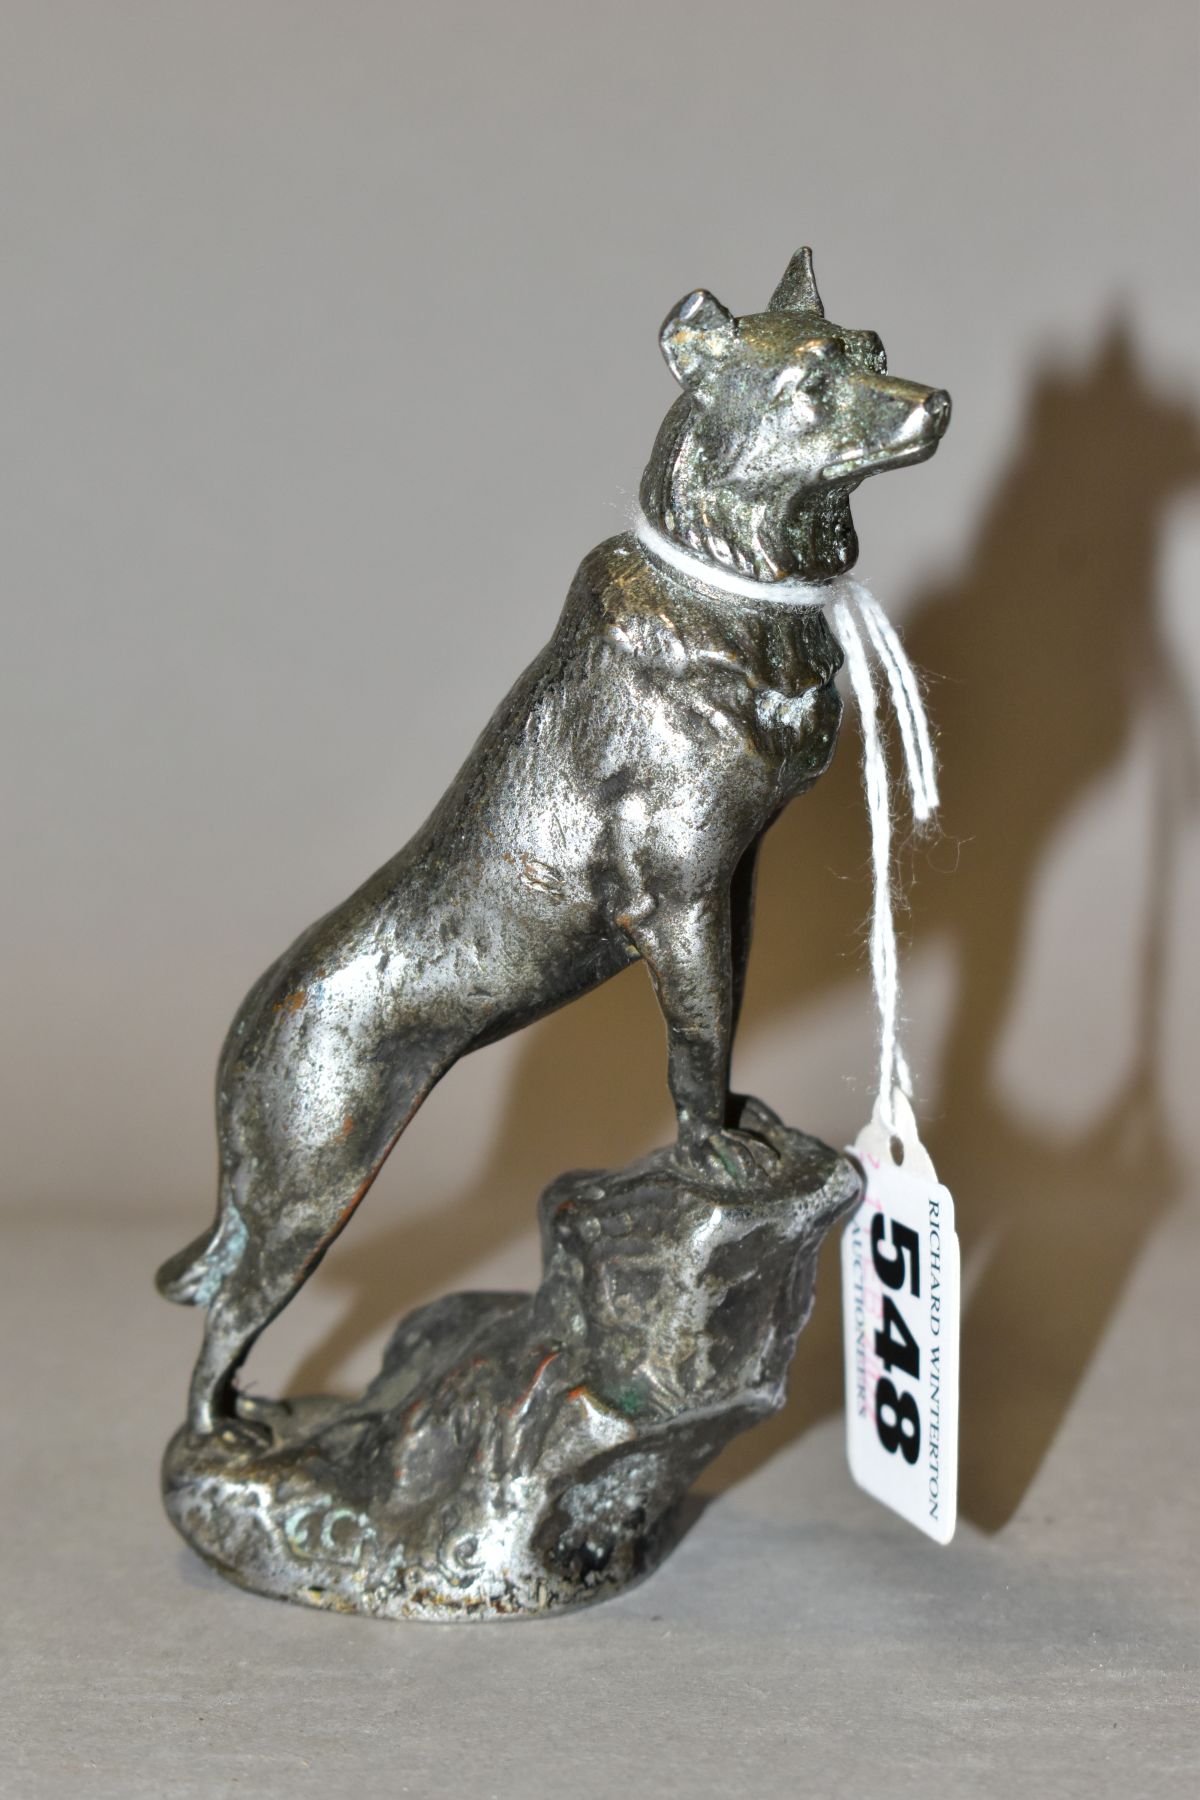 A CHROMED METAL CAR MASCOT IN THE FORM OF AN ALSATIAN STANDING WITH ITS FRONT LEGS ON A ROCK,